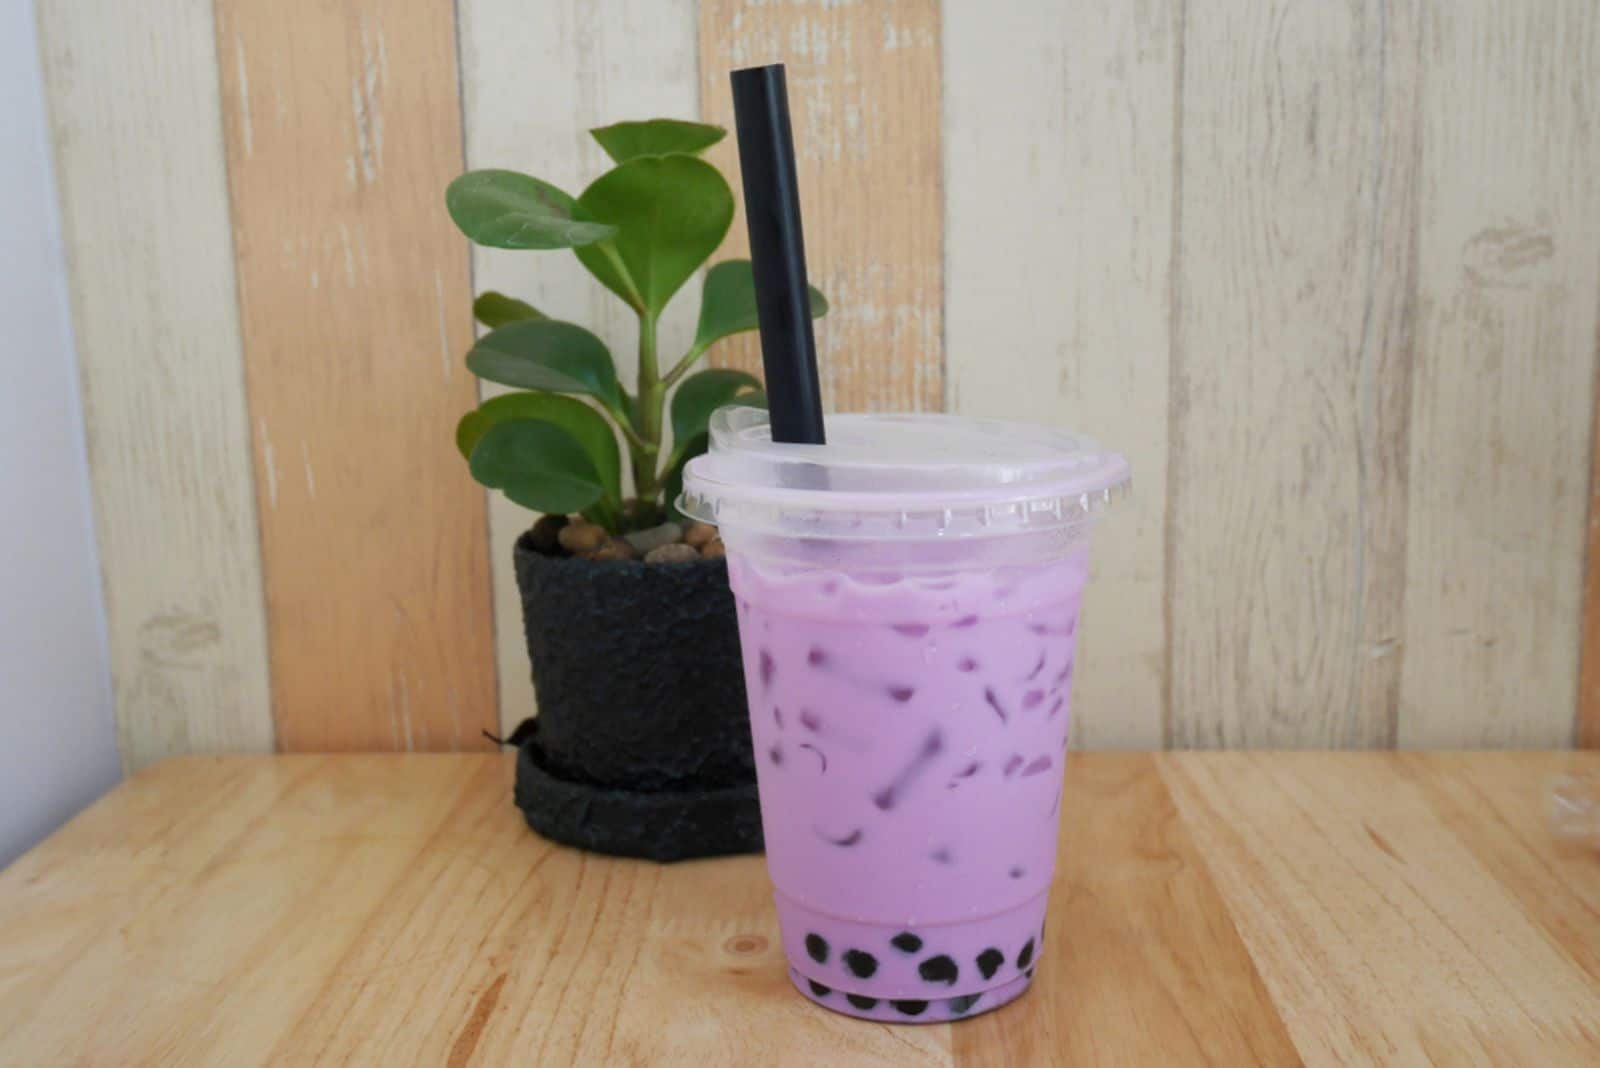 Taro Bubble Milk Tea in Plastic Cup with a Straw on Wooden Table